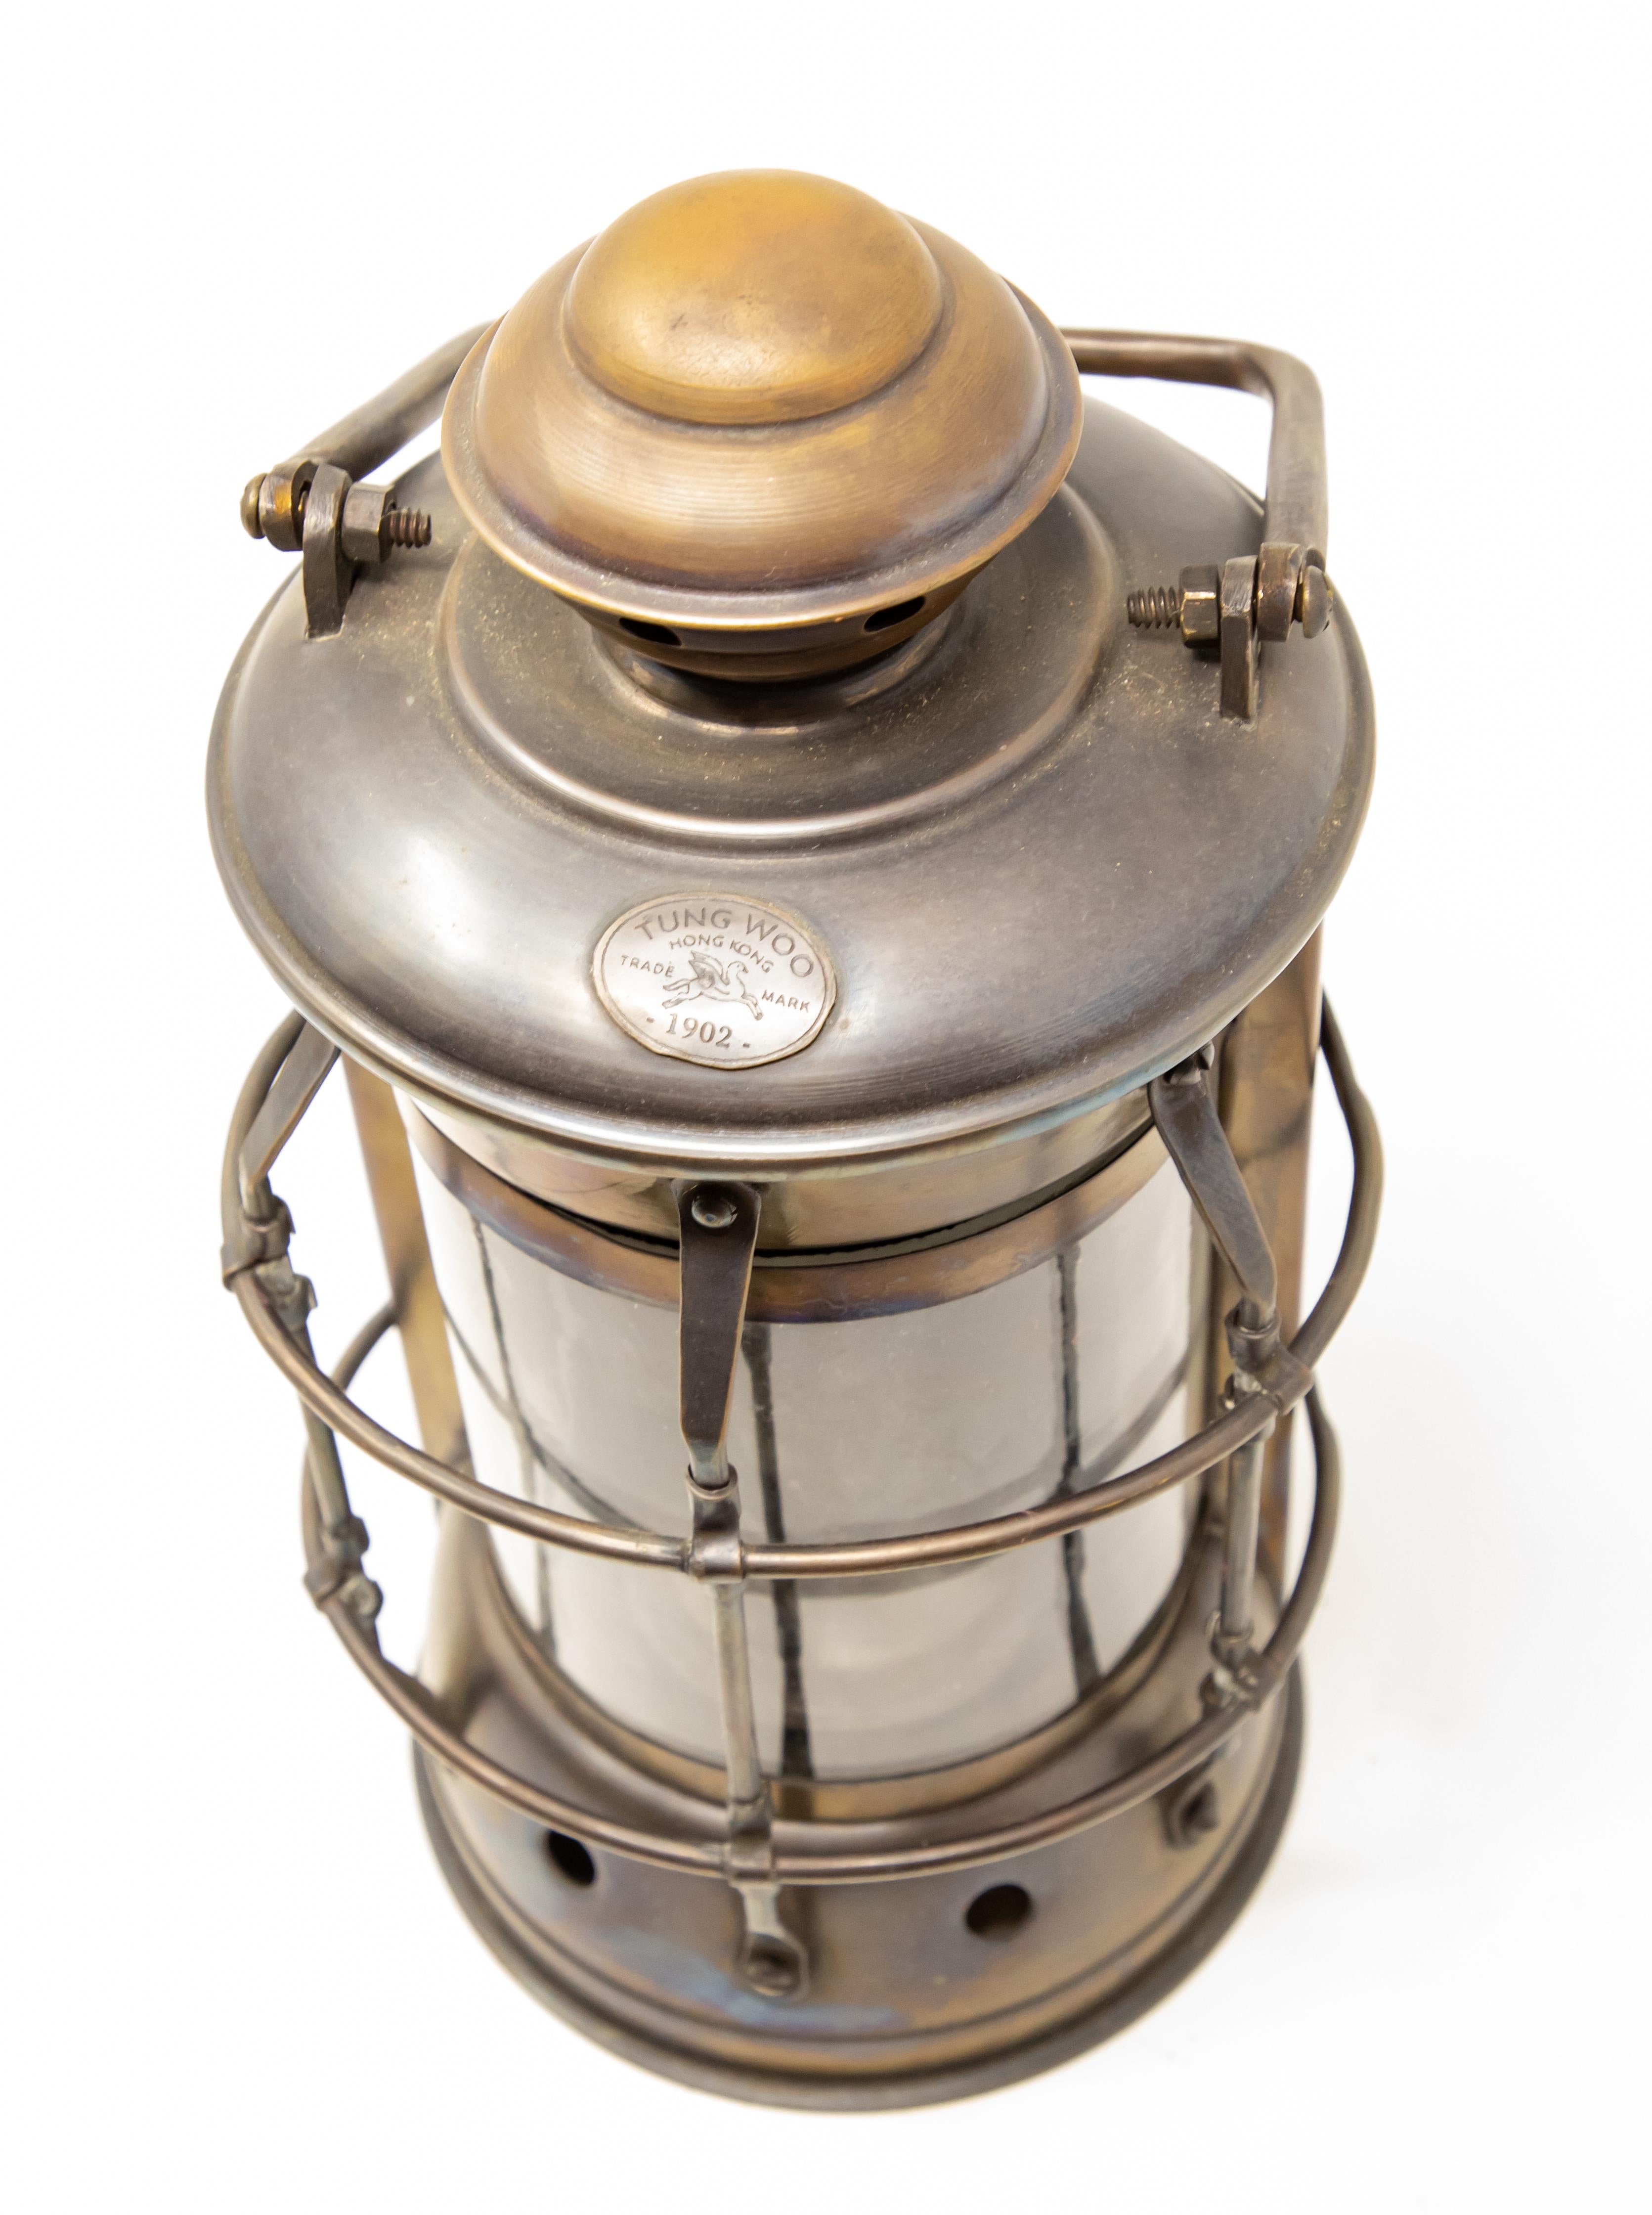 Offering this ship lantern by Tung Woo out of Hong Kong. Gorgeous aging to the copper make for the rustic look of the lantern.